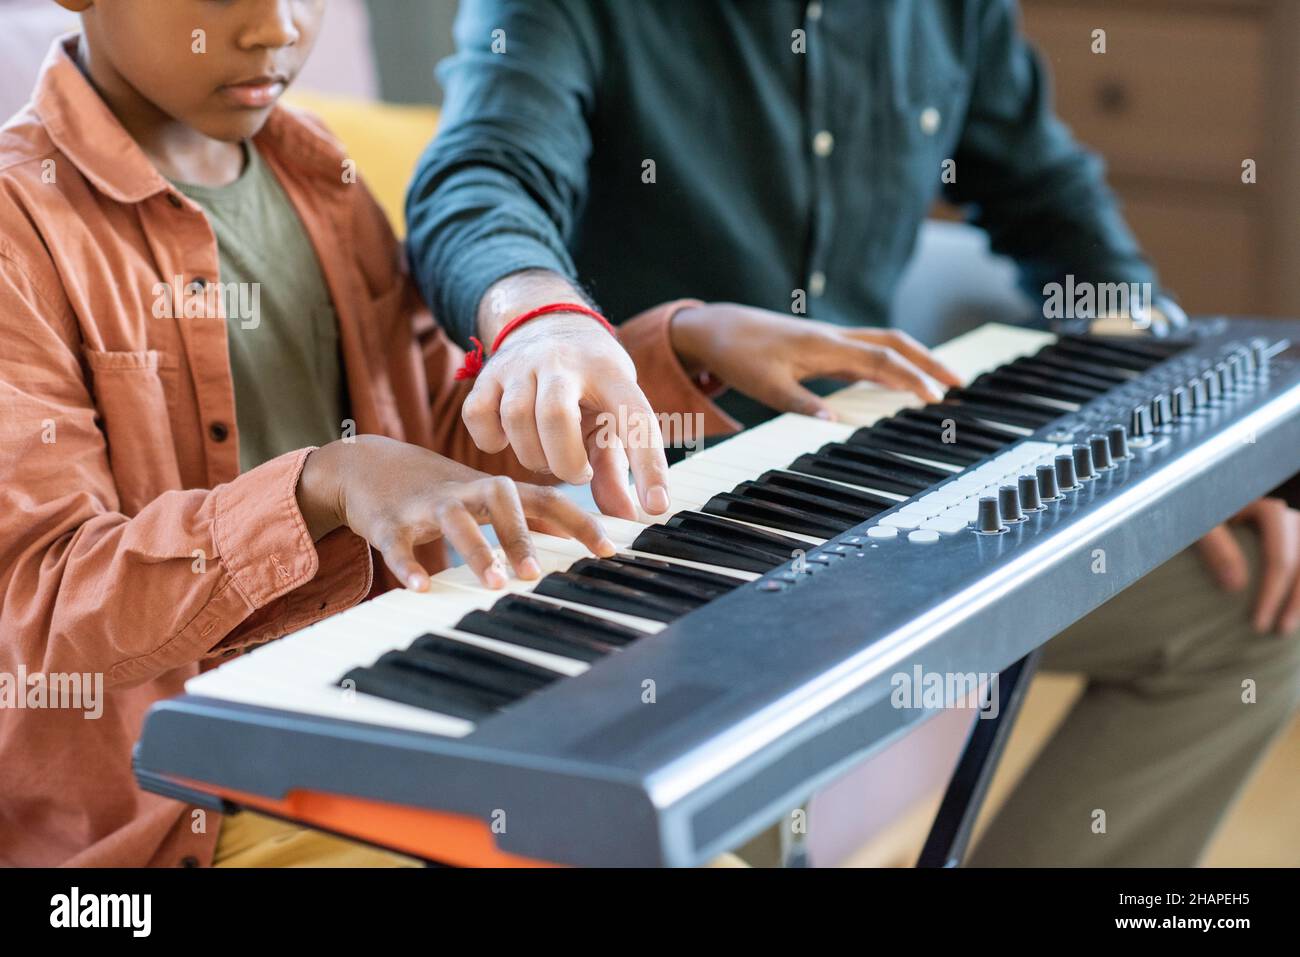 Hand of young teacher of music pointing at one of keys of piano keyboard during lesson in home environment Stock Photo